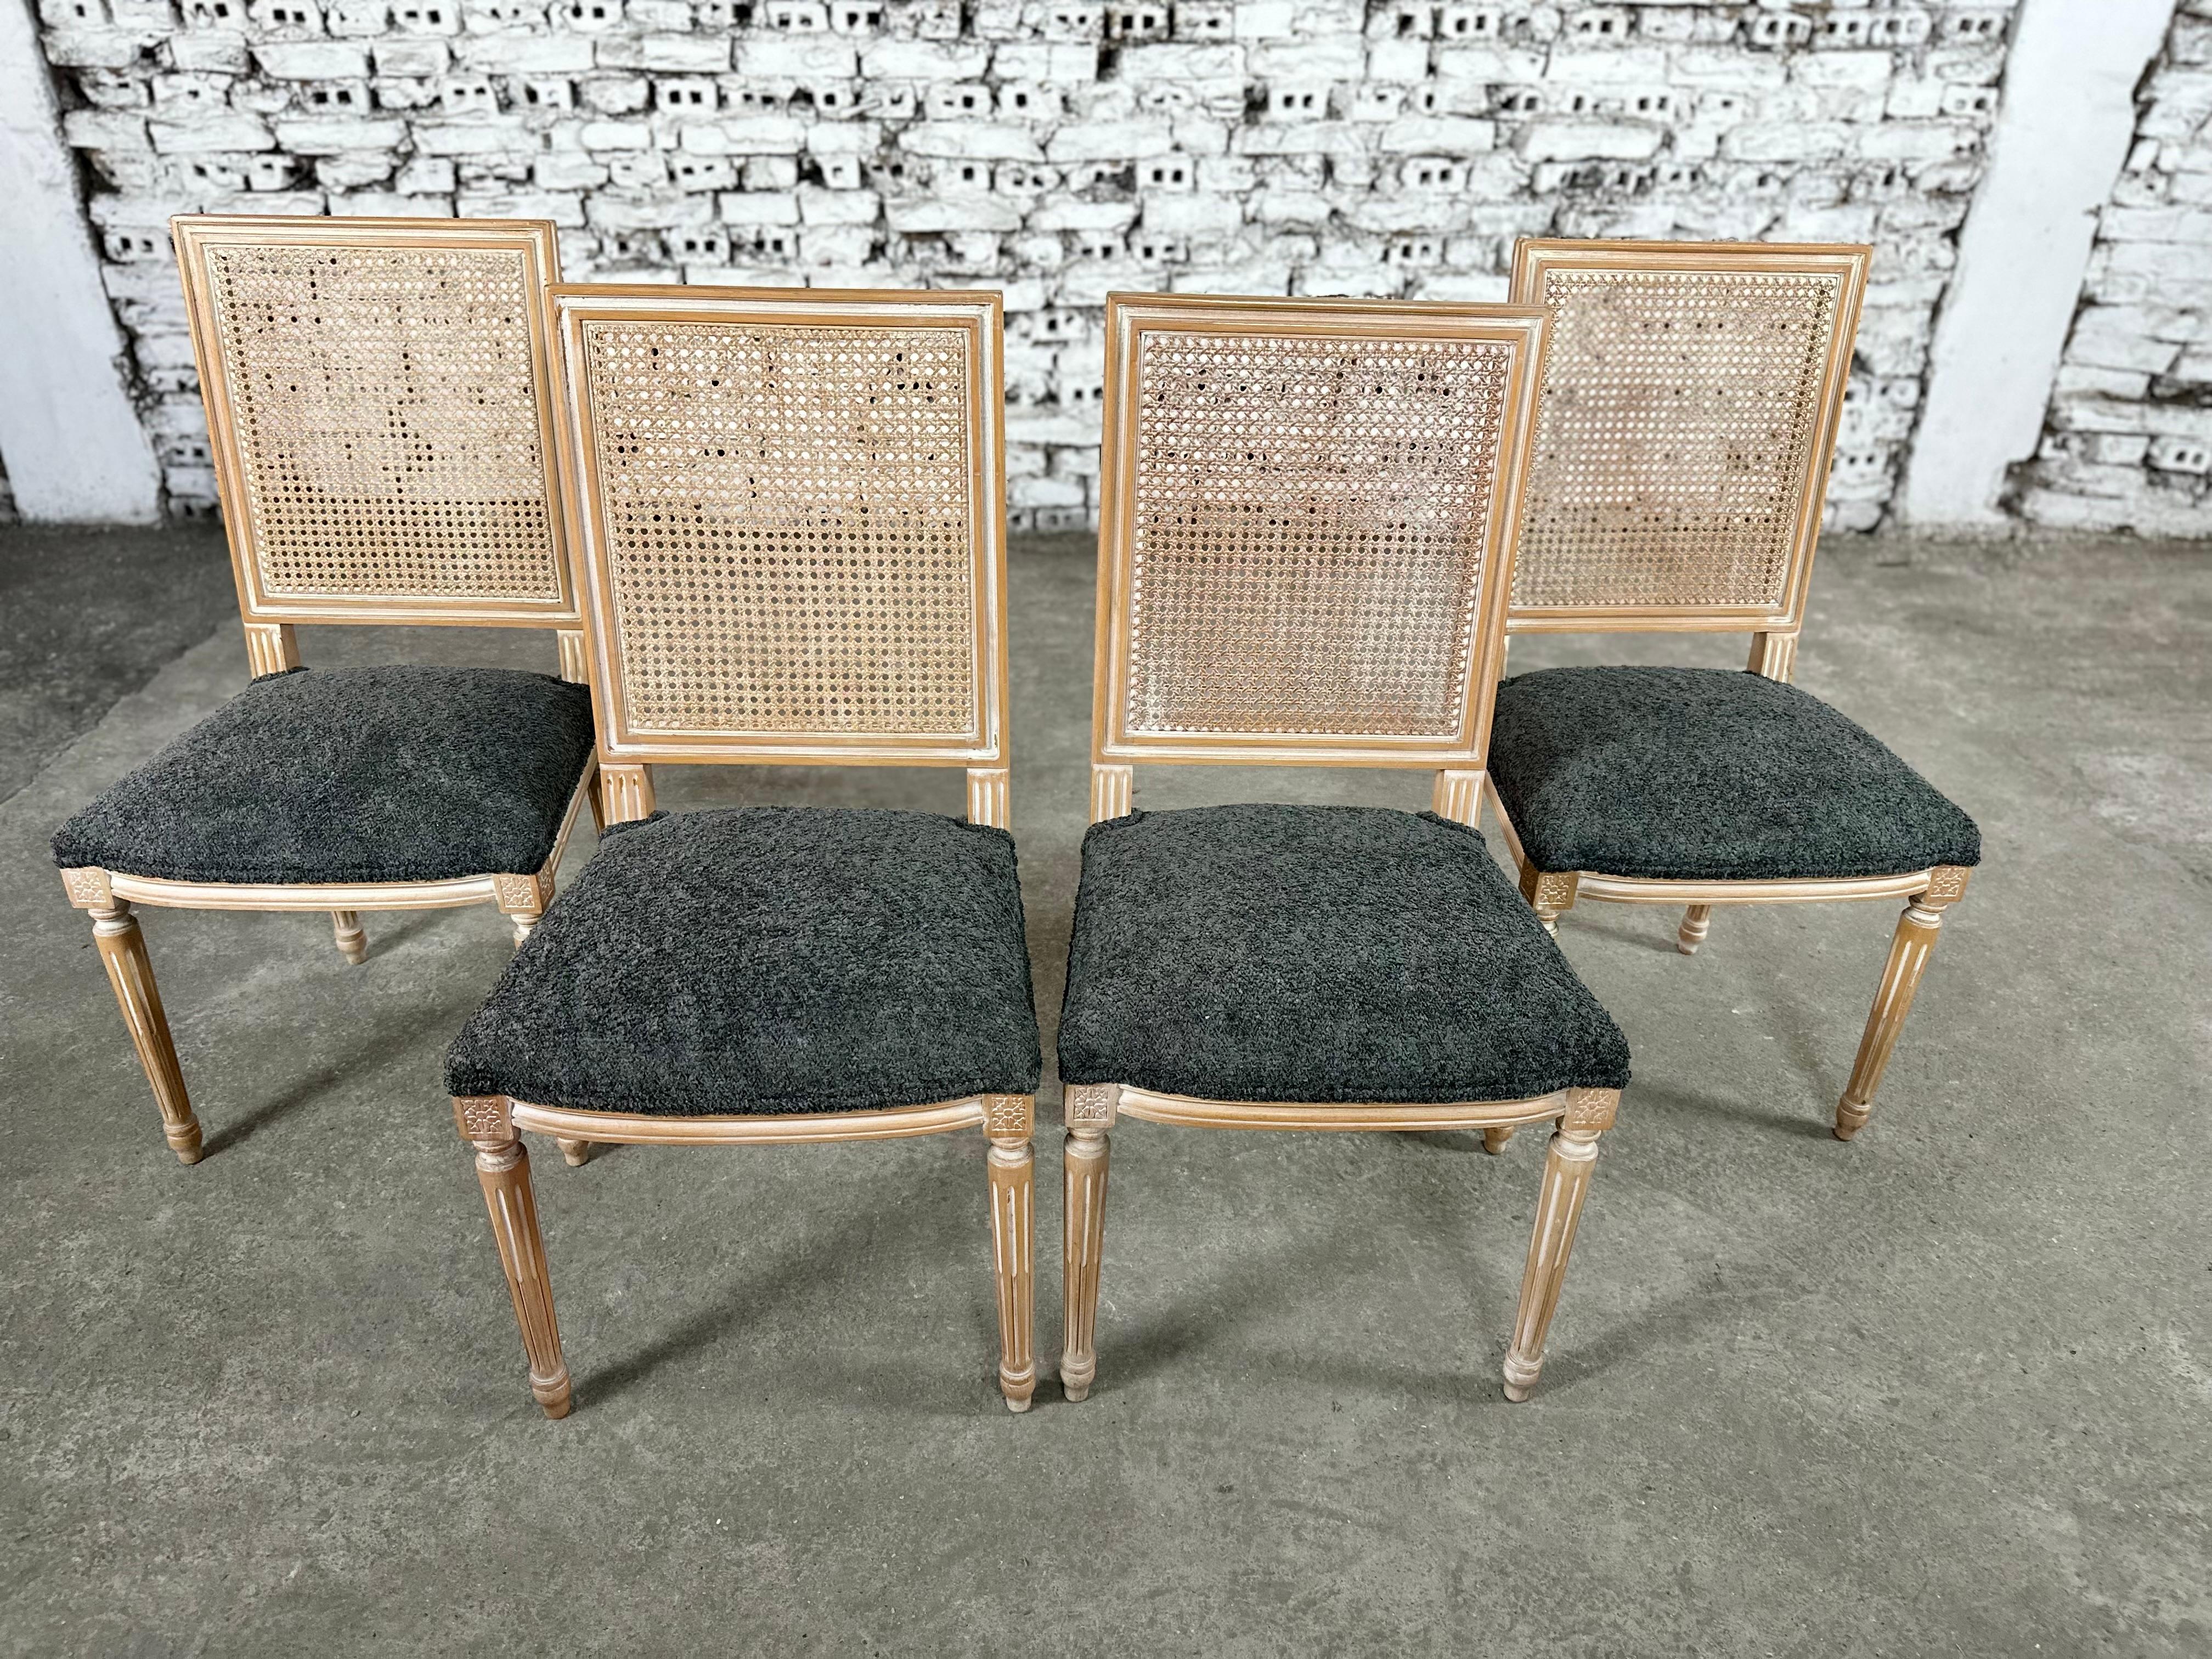 20th Century Reupholstered Square Back Louis XVI Style Dining Chairs - Set of 4 For Sale